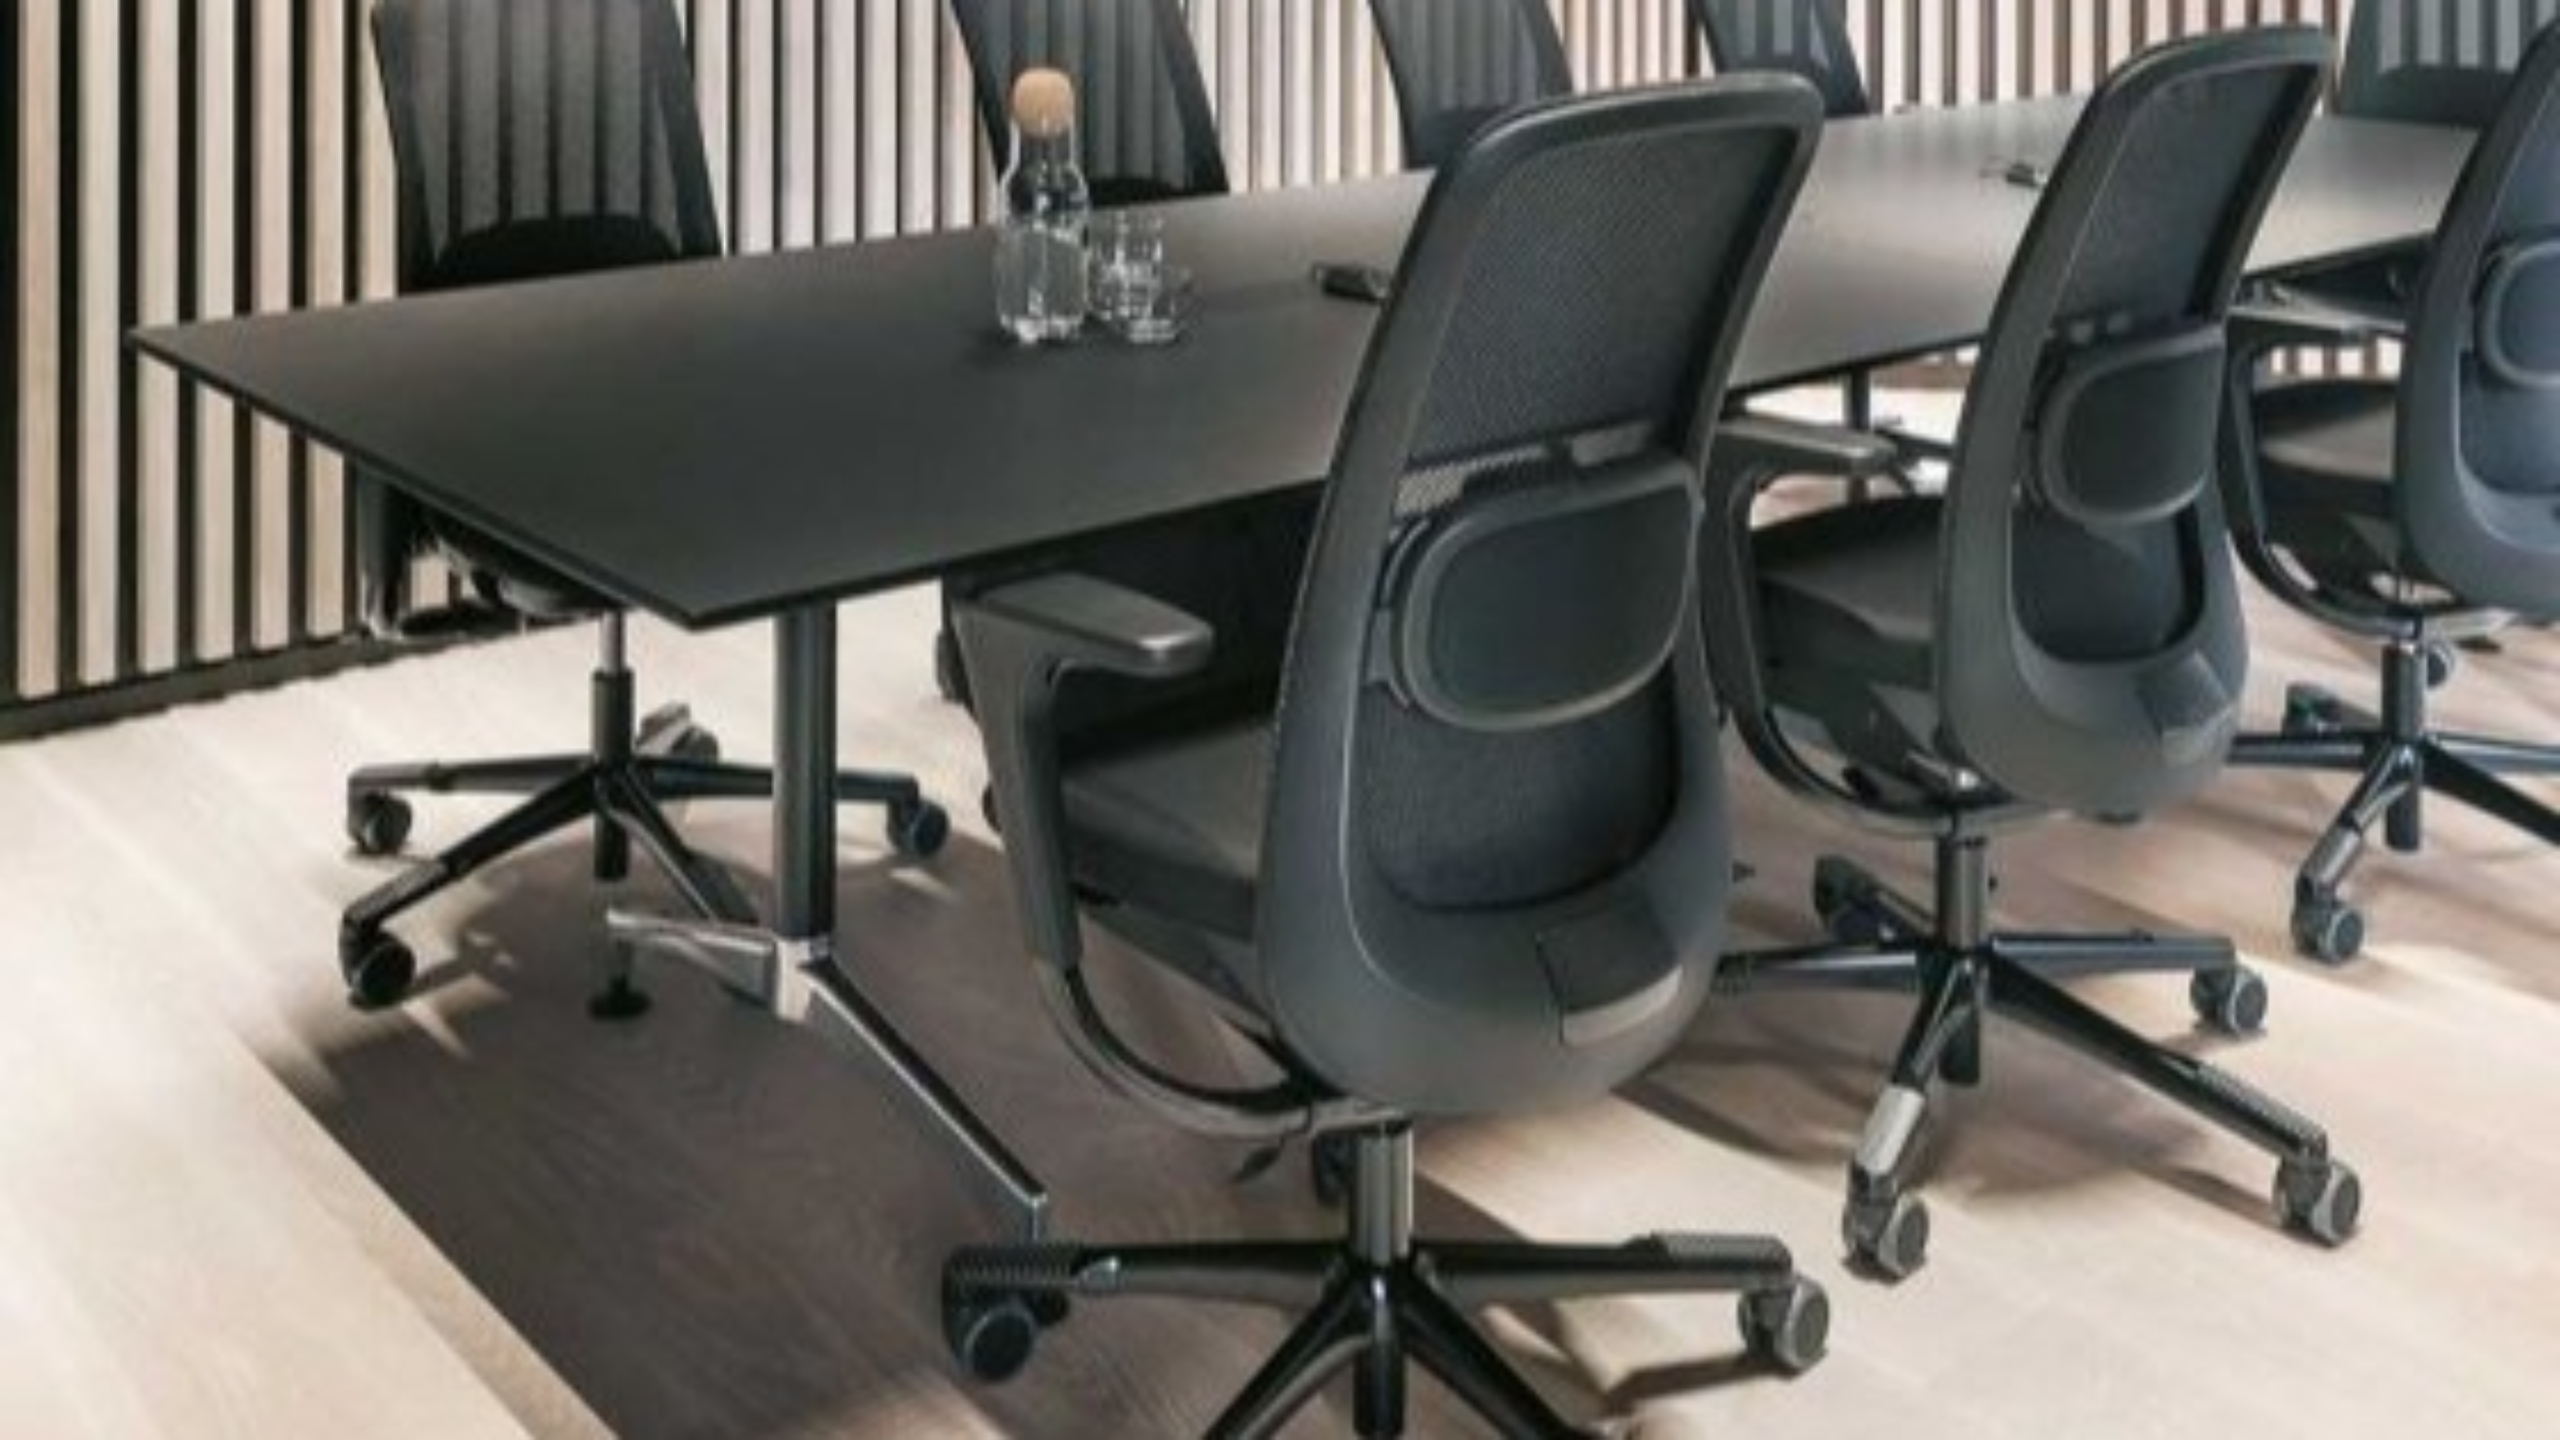 5 essential features of a good office chair | TechRadar